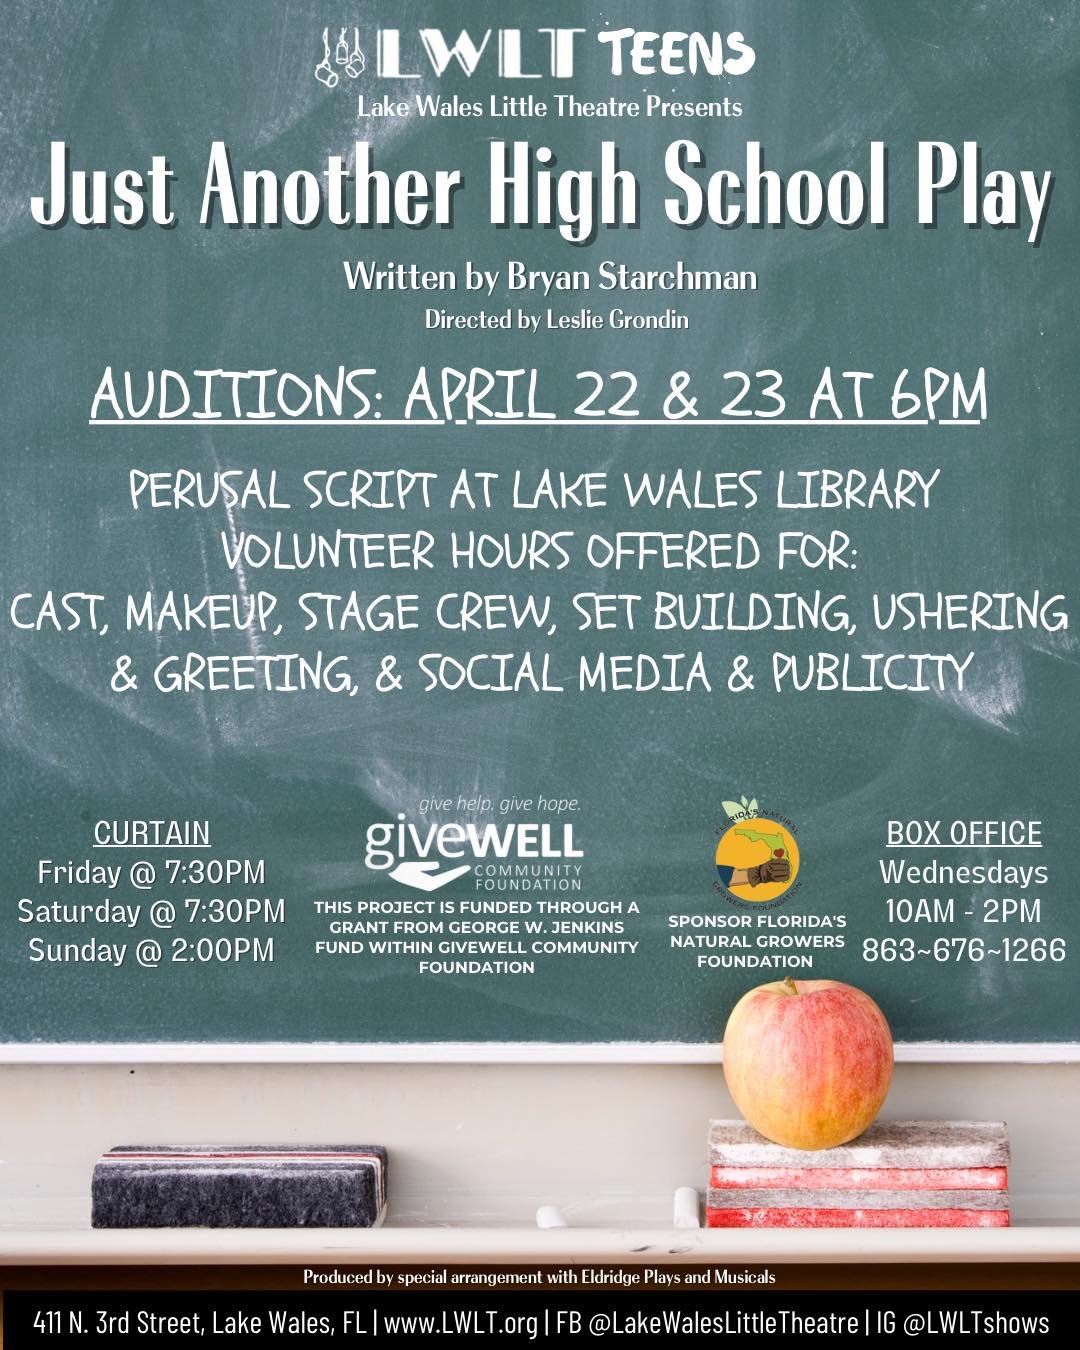 Audition Notice!! Calling actors, ages 13-18!

Teen Show Auditions will be held Monday and Tuesday, April 22nd and 23rd at 6pm. We hope to see you there! 

🏫 Just Another High School Play
📅 Show dates: June 7-16
📲 Learn more: www.LWLT.org

Online 